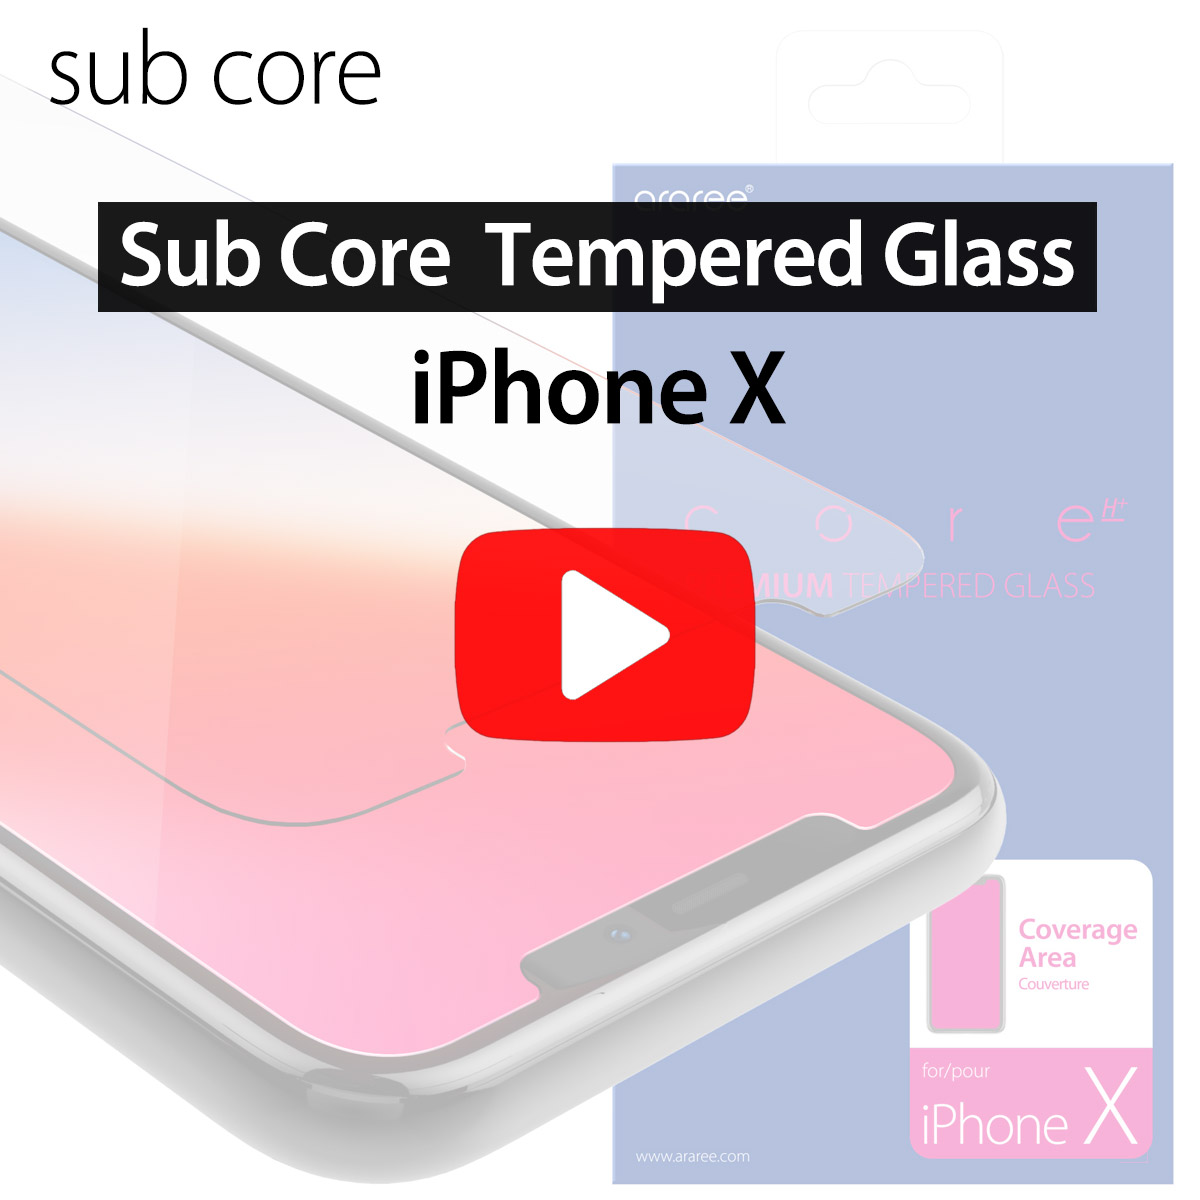 core iPhone X] Sub core Tempered Glass Screen Protector Install Guide